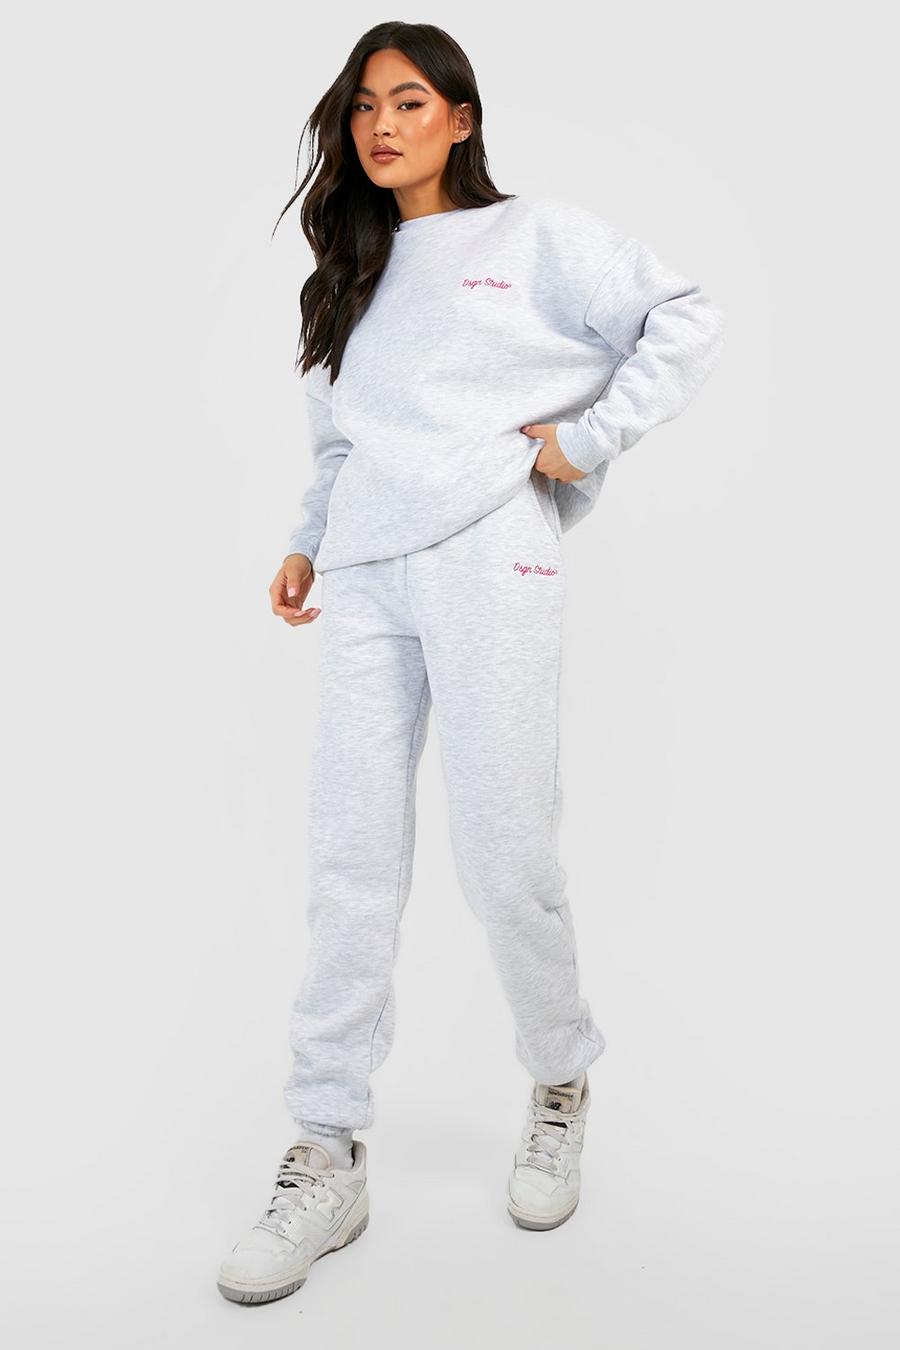 Dsgn Studio Embroidered Sweater Tracksuit 